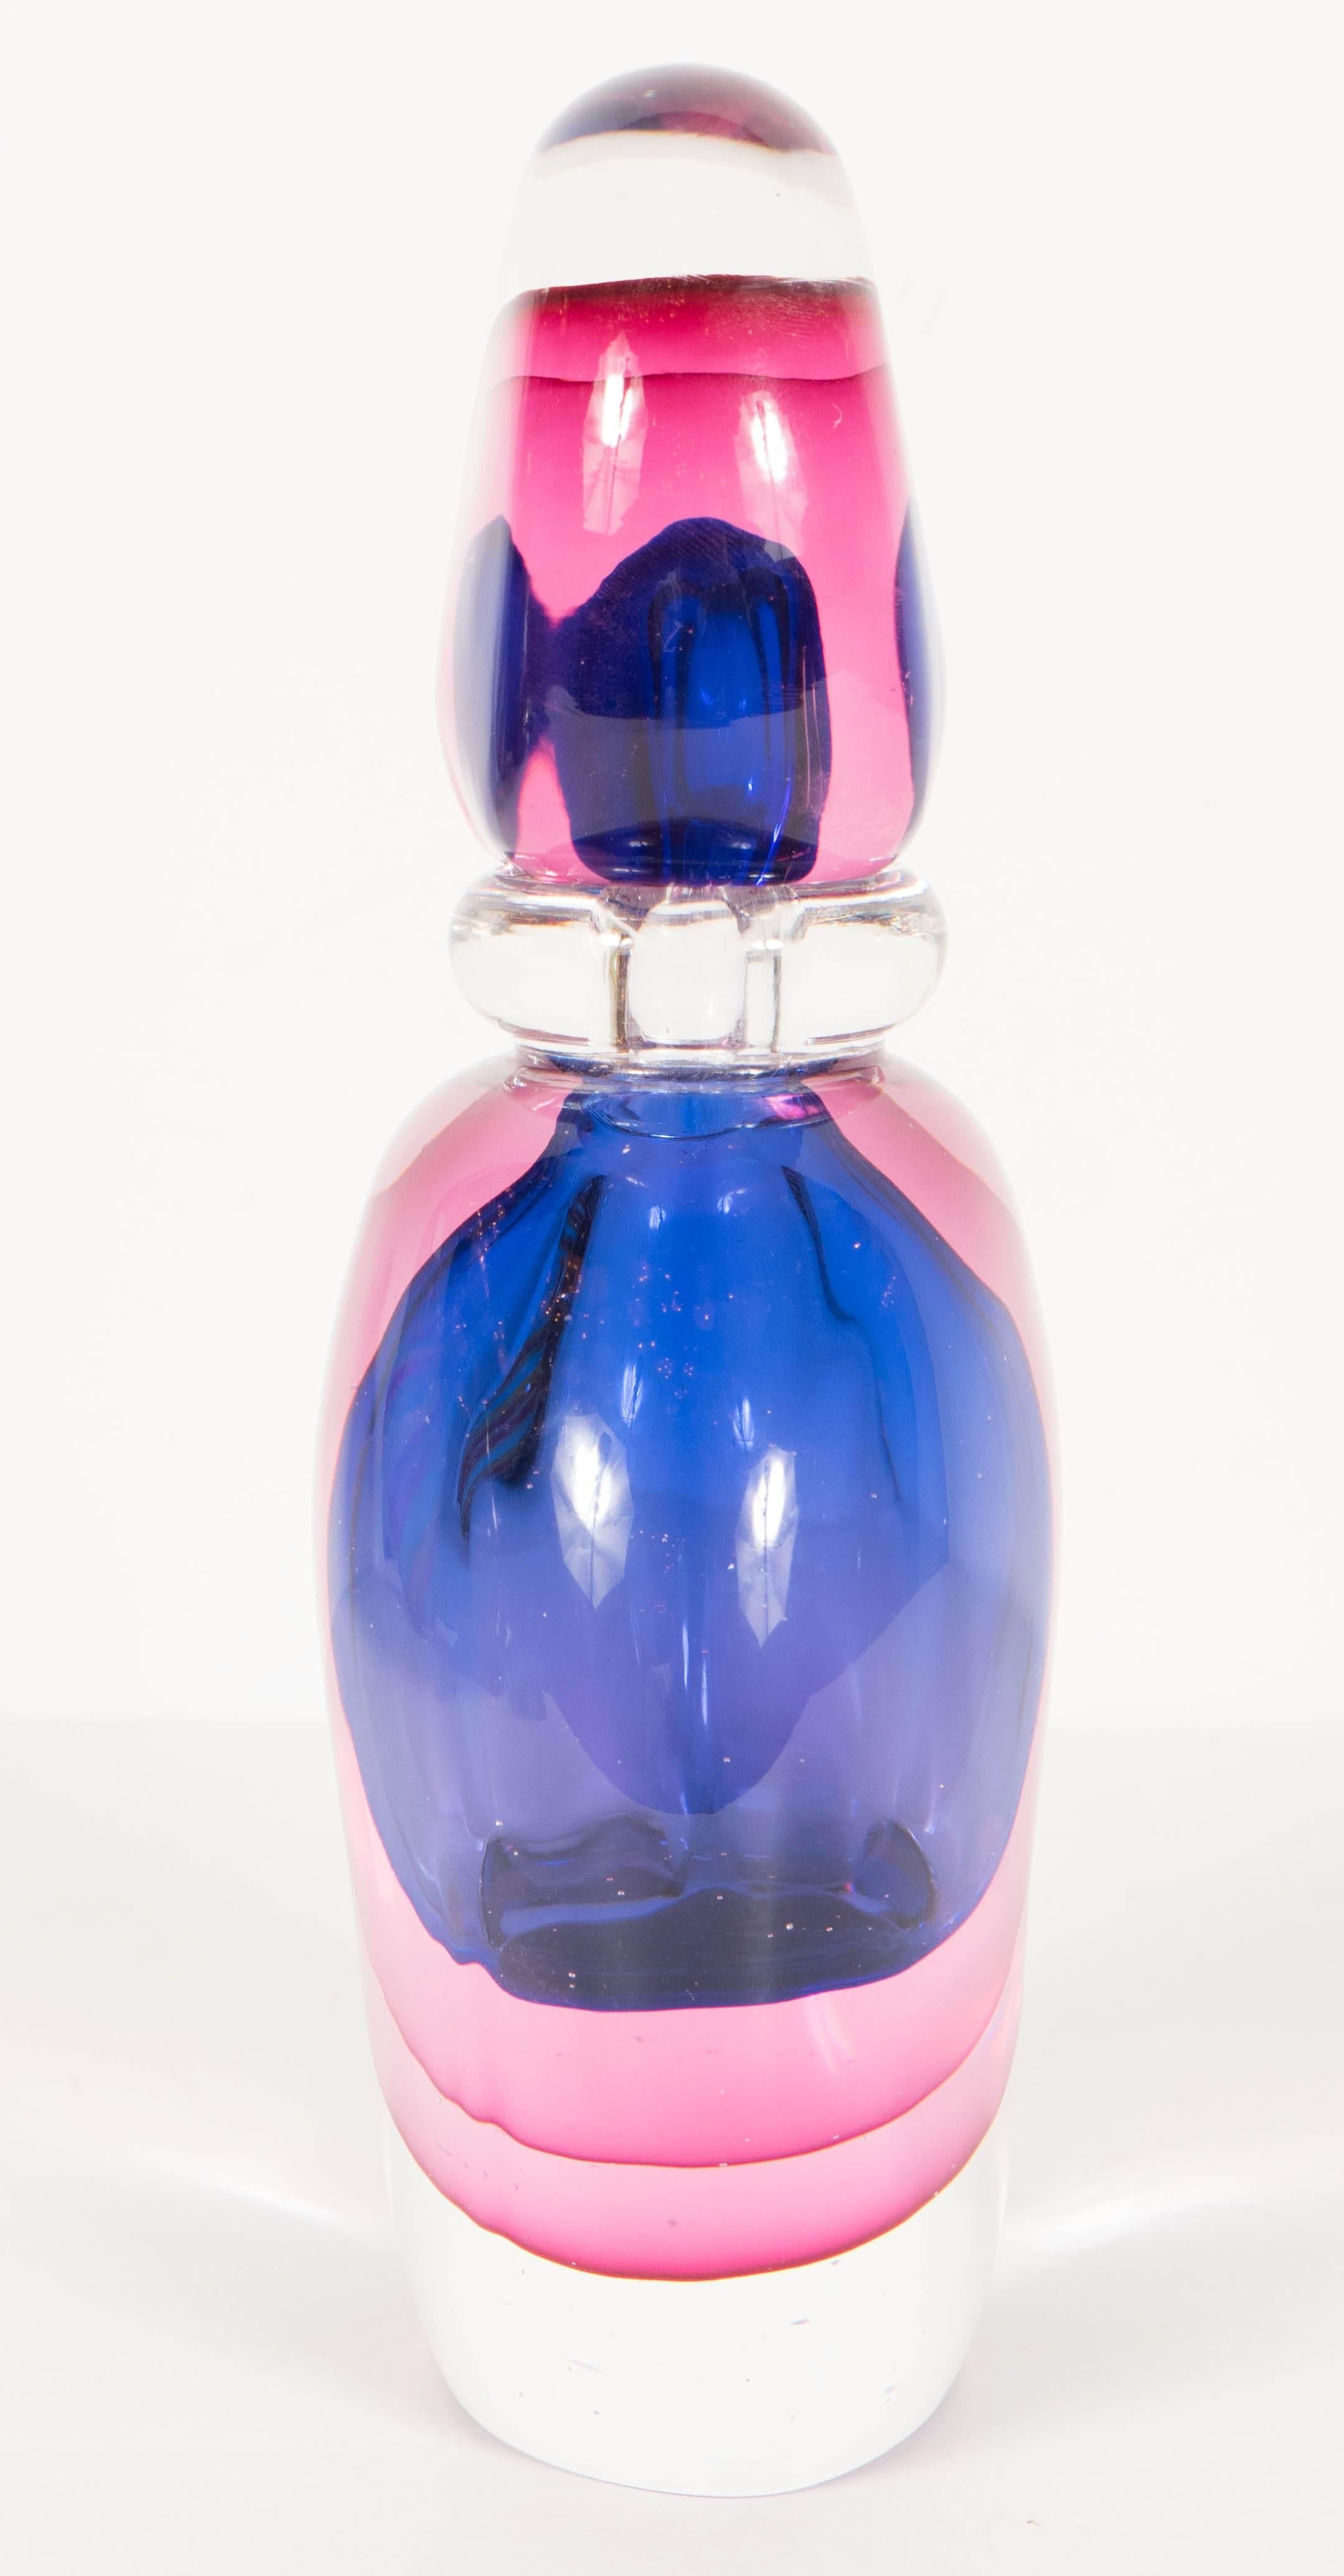 Italian Gorgeous Salviati Sommerso Murano Perfume Bottle in Blue, Pink and Clear Glass